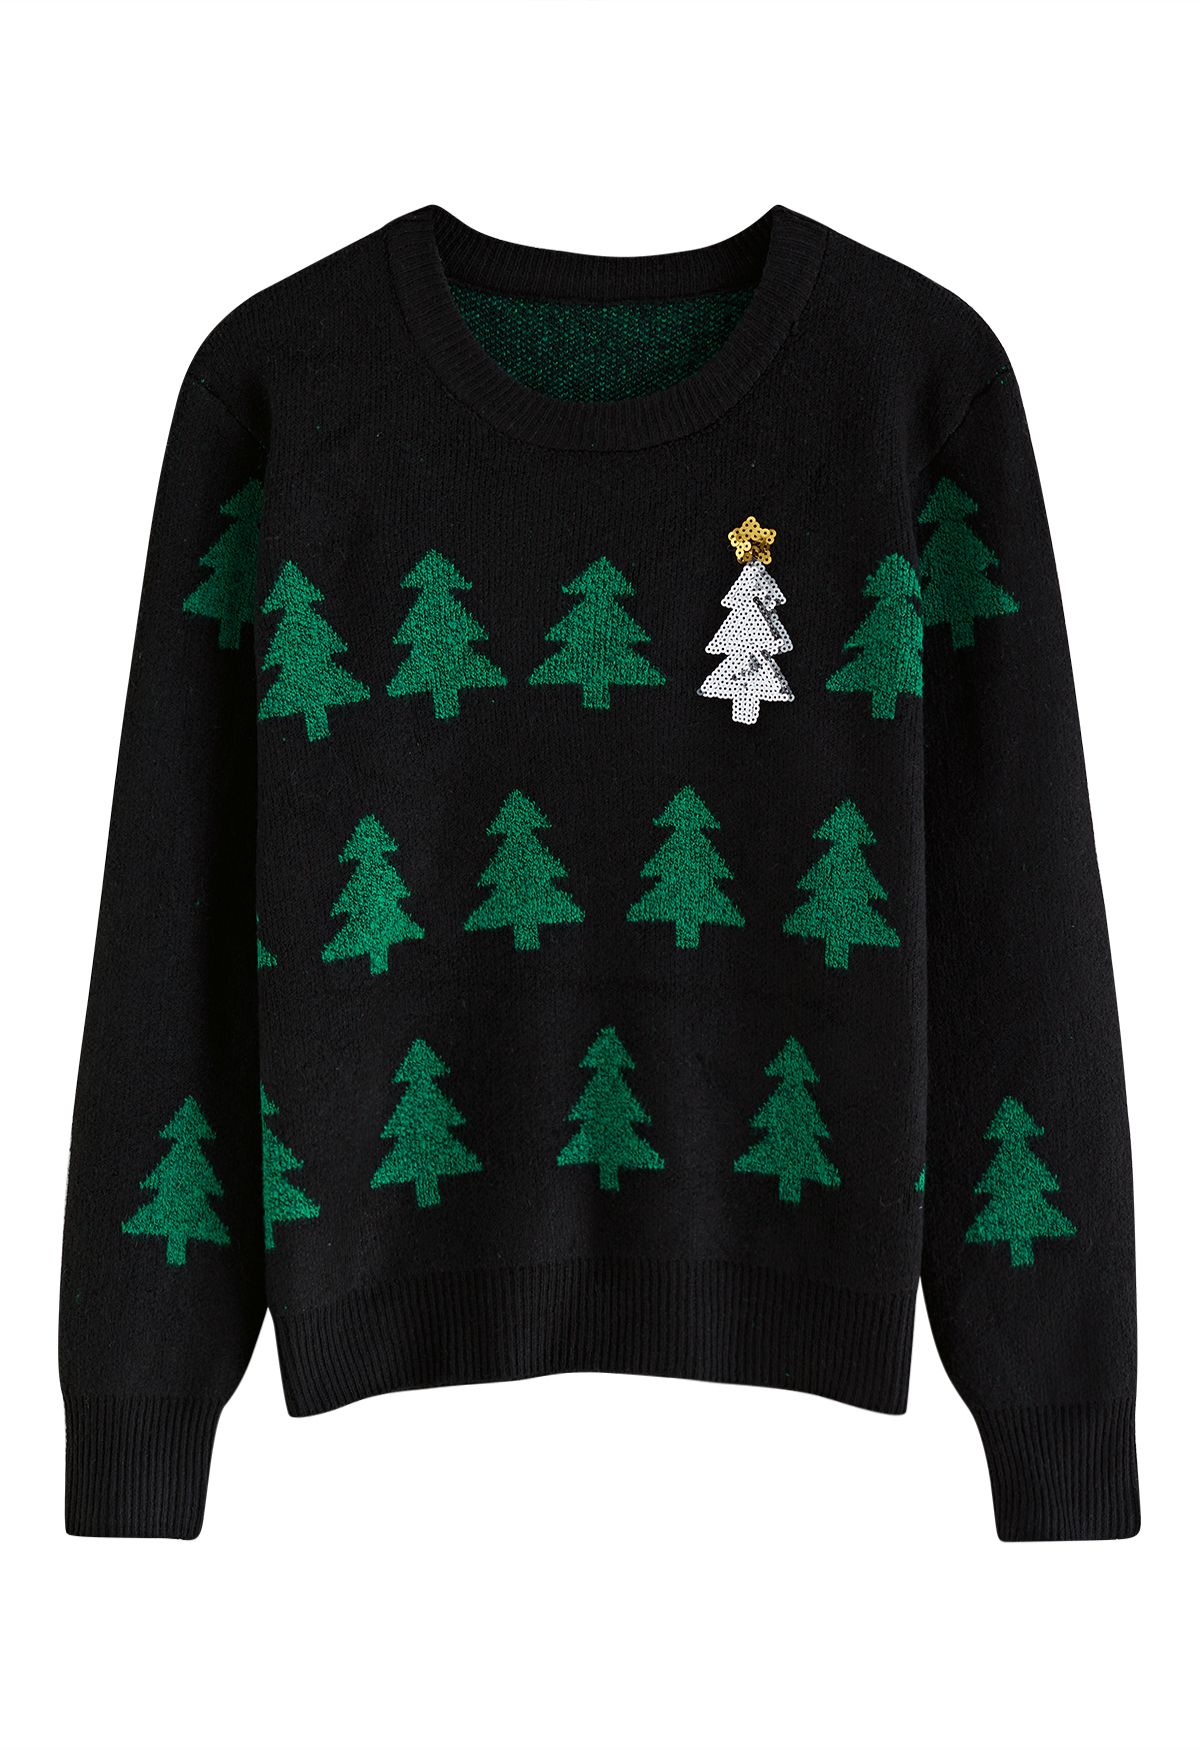 Sequined Christmas Tree Knit Sweater in Black - Retro, Indie and Unique ...